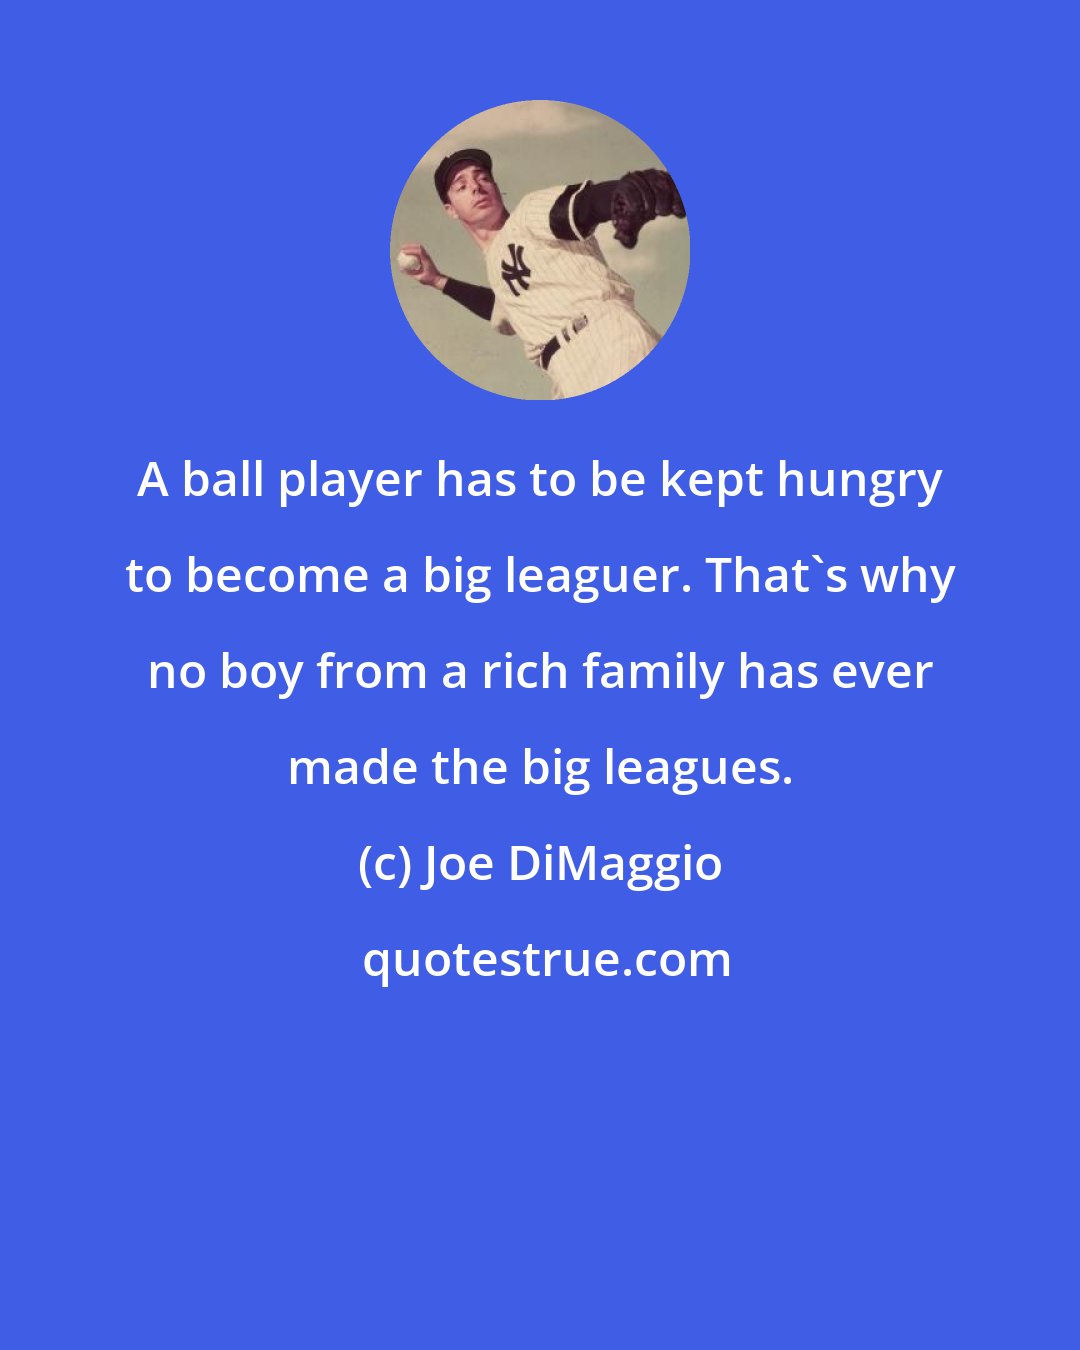 Joe DiMaggio: A ball player has to be kept hungry to become a big leaguer. That's why no boy from a rich family has ever made the big leagues.